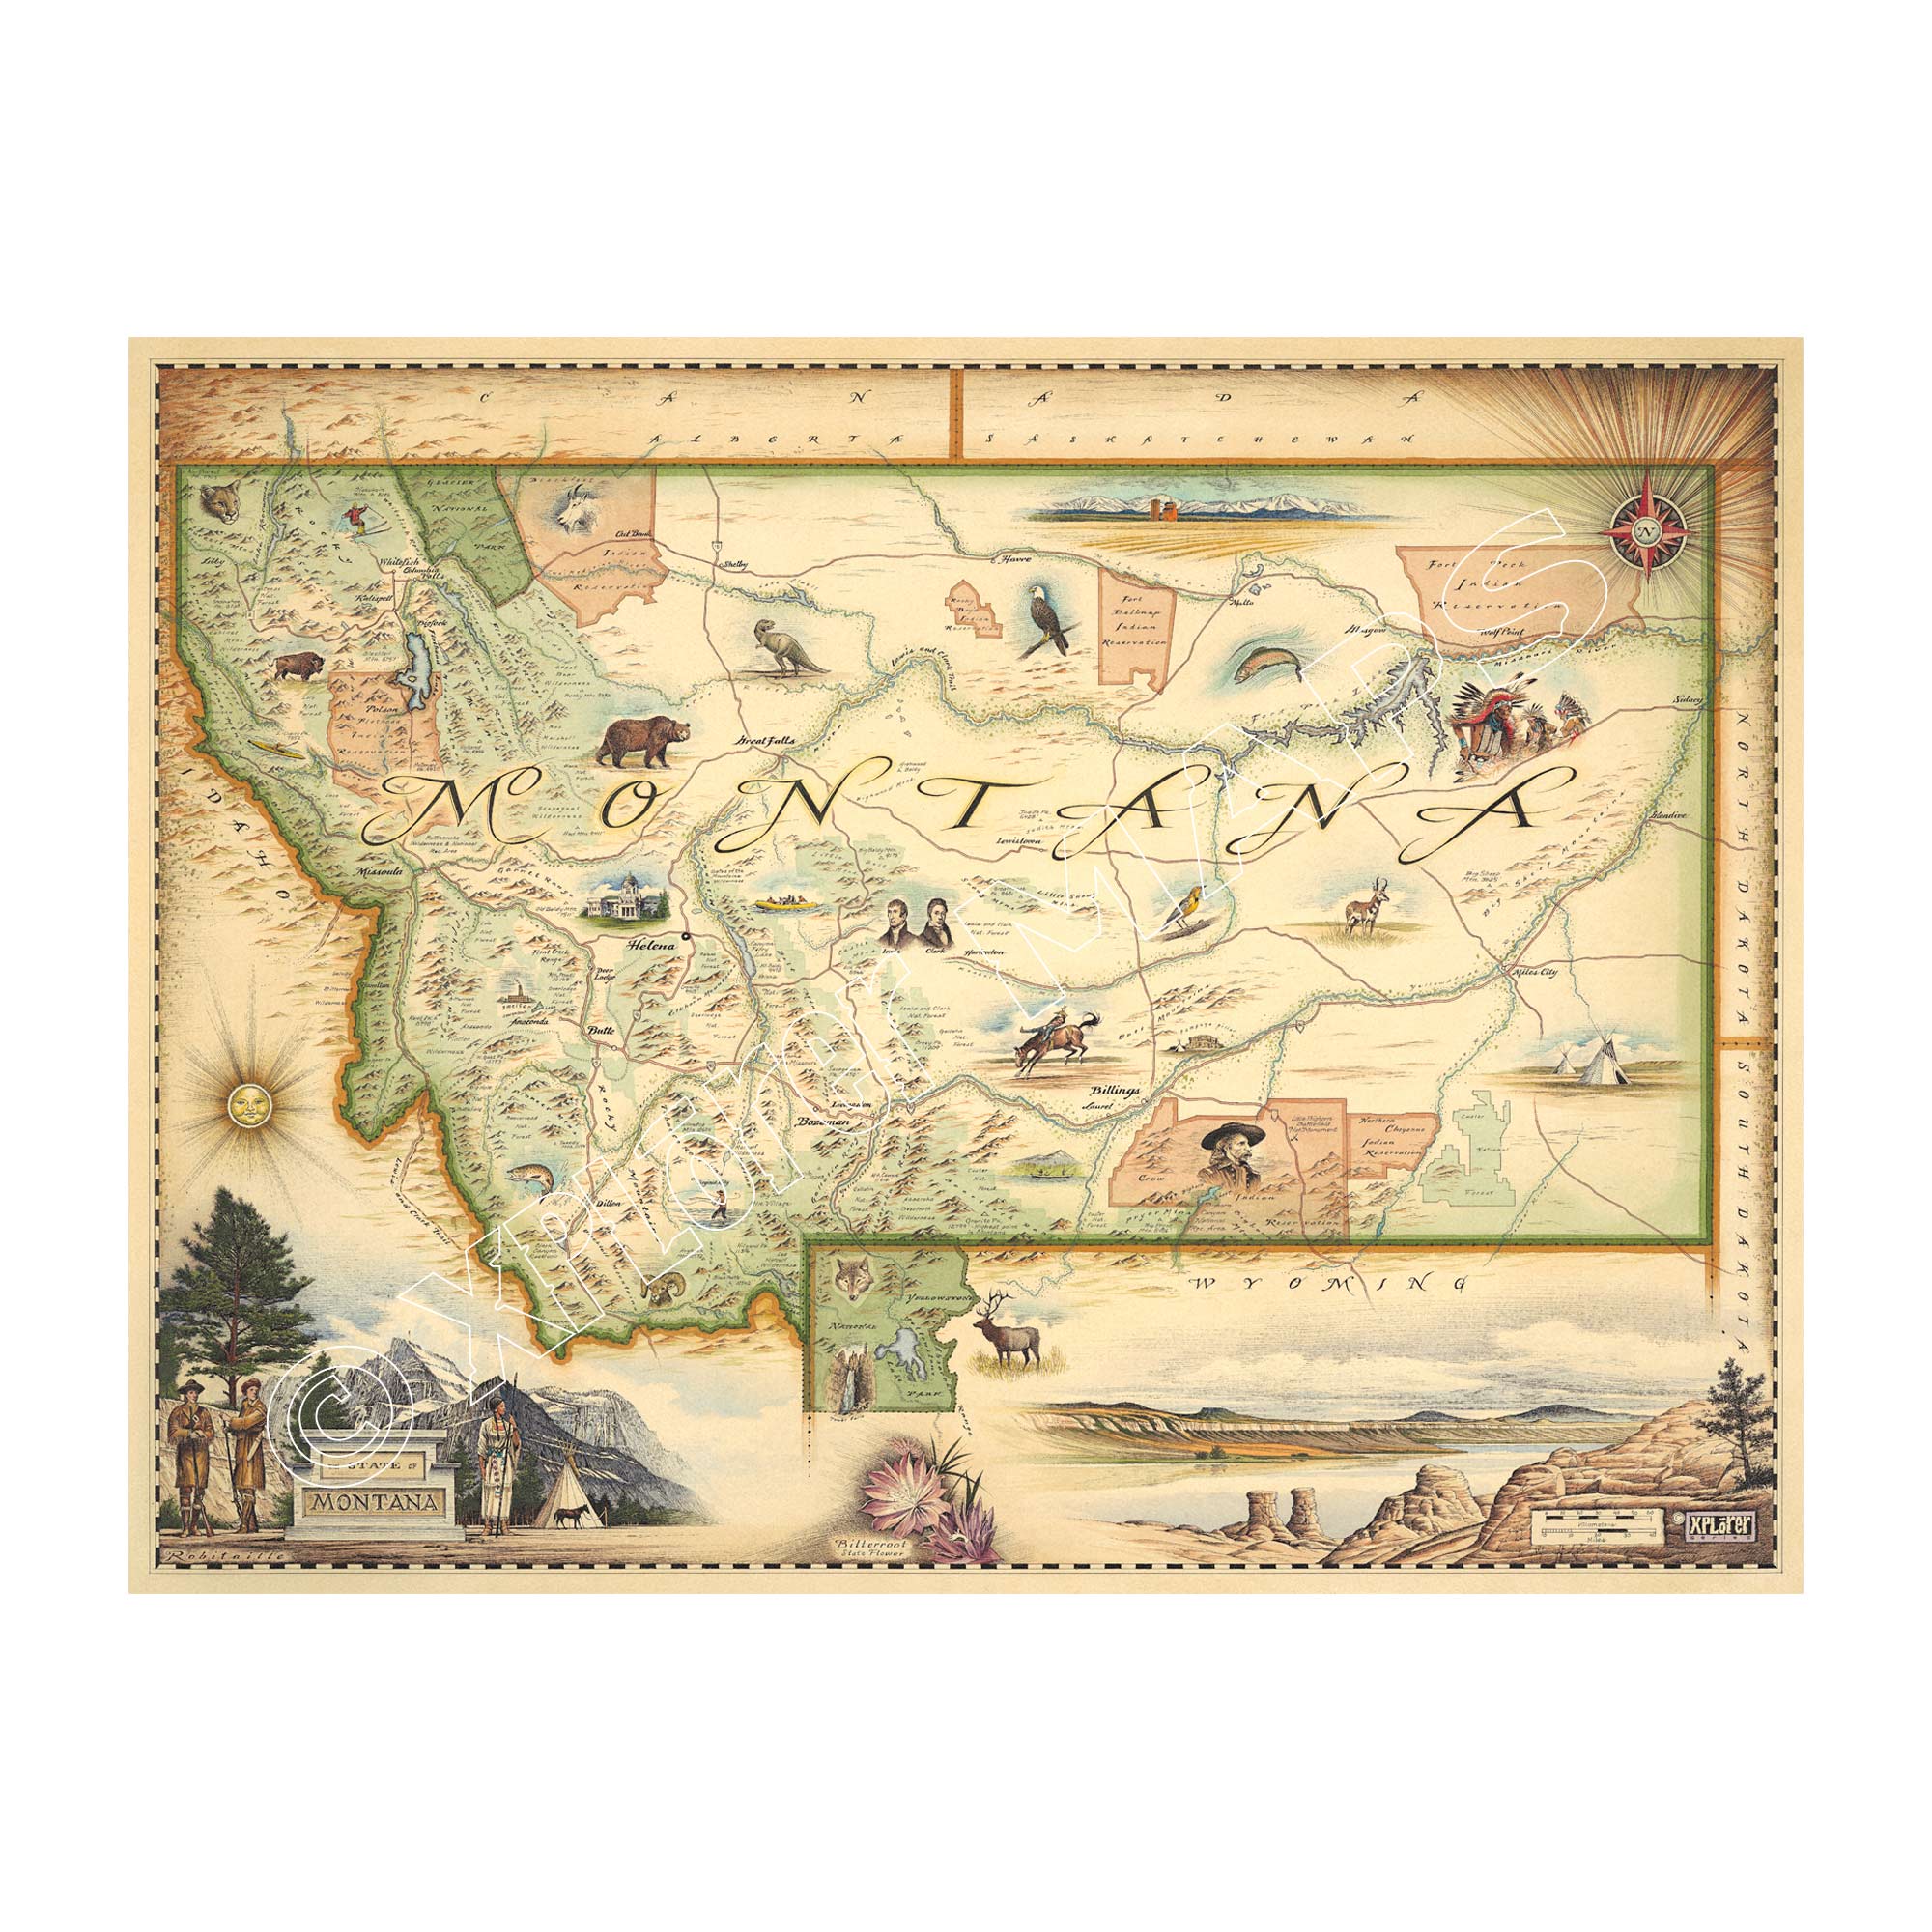 This Lithographic Map Art Print features a hand-illustrated map of Montana. Original hand-drawn pen and ink/watercolor artwork by Chris Robitaille of Xplorer Maps. The map is featuring Sacajawea, Lewis & Clark, Yellowstone, Glacier National Park, Flathead Lake, Missoula, Bozeman, Helena, and Whitefish. The Big Sky State Map is 24